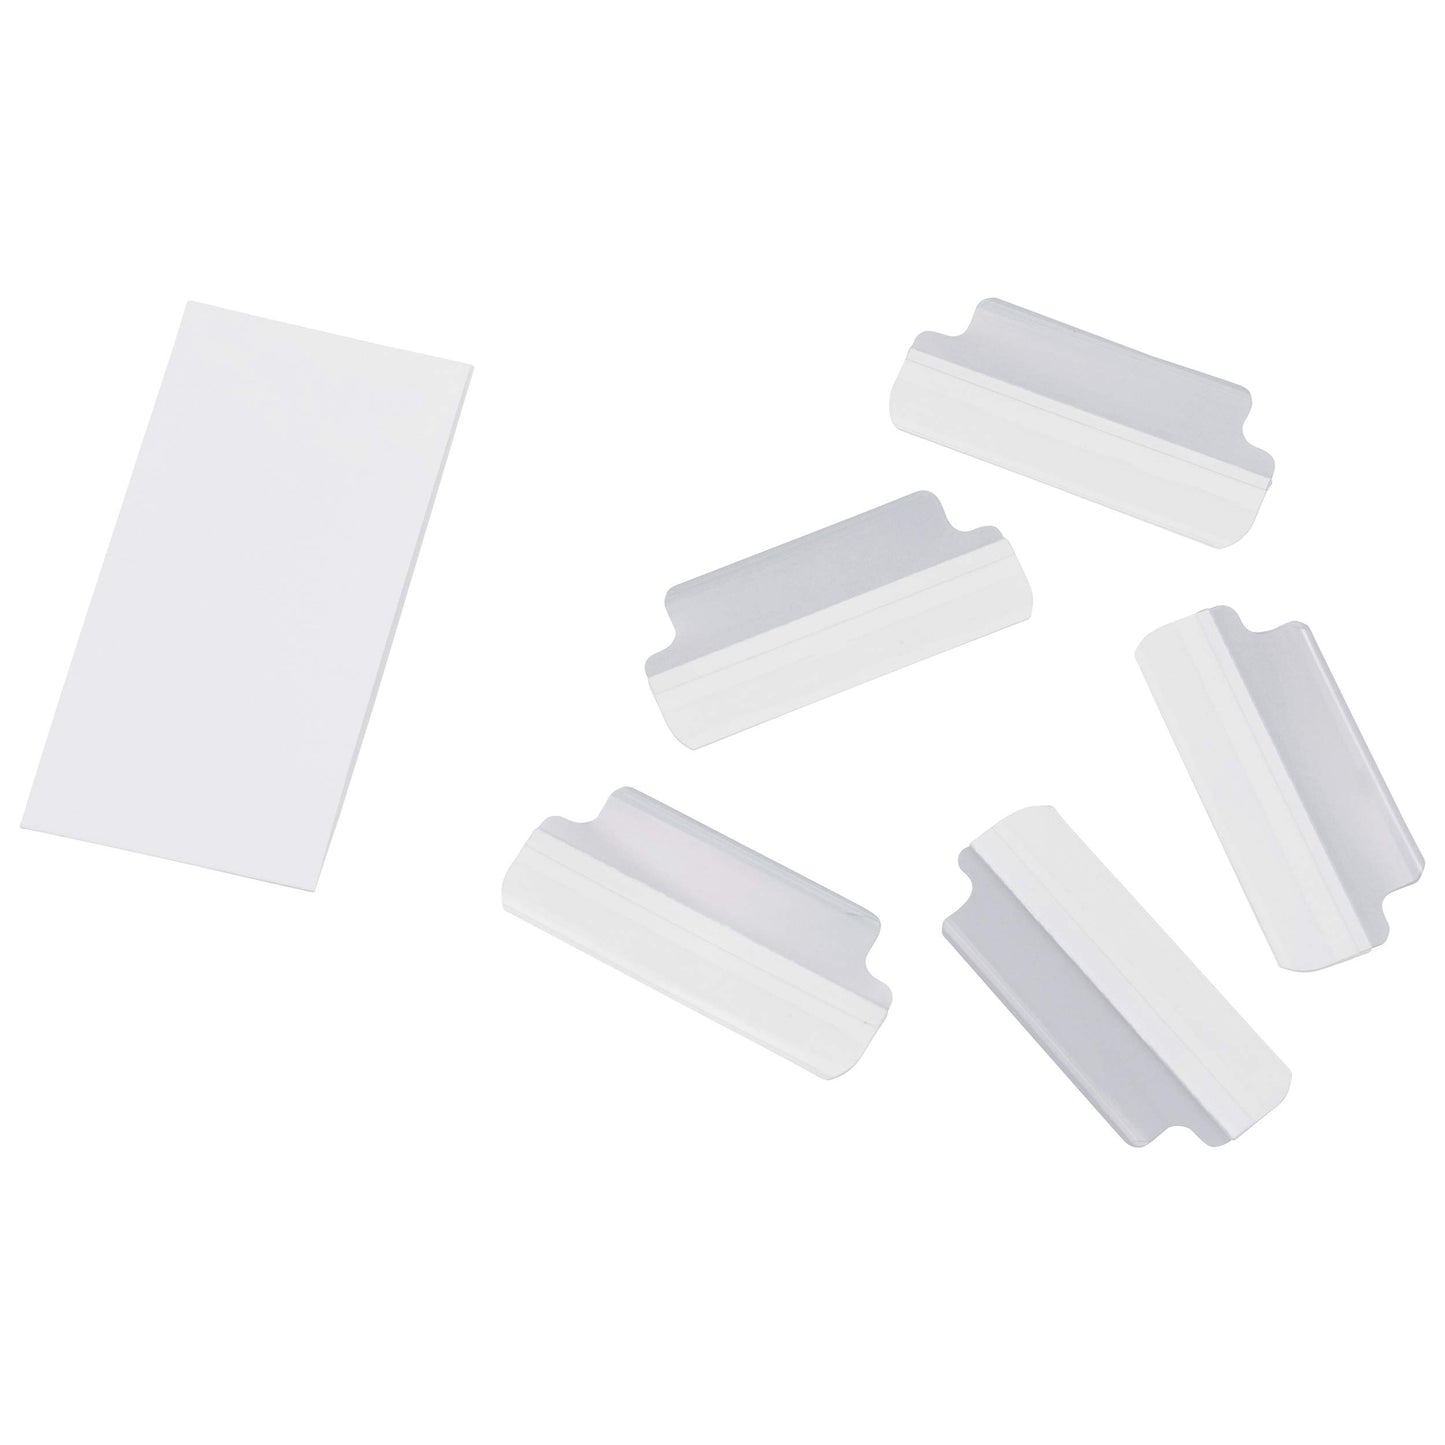 ADVANTUS Self Adhesive Index Tabs with Inserts, 16 Tabs, Clear (Z06015)